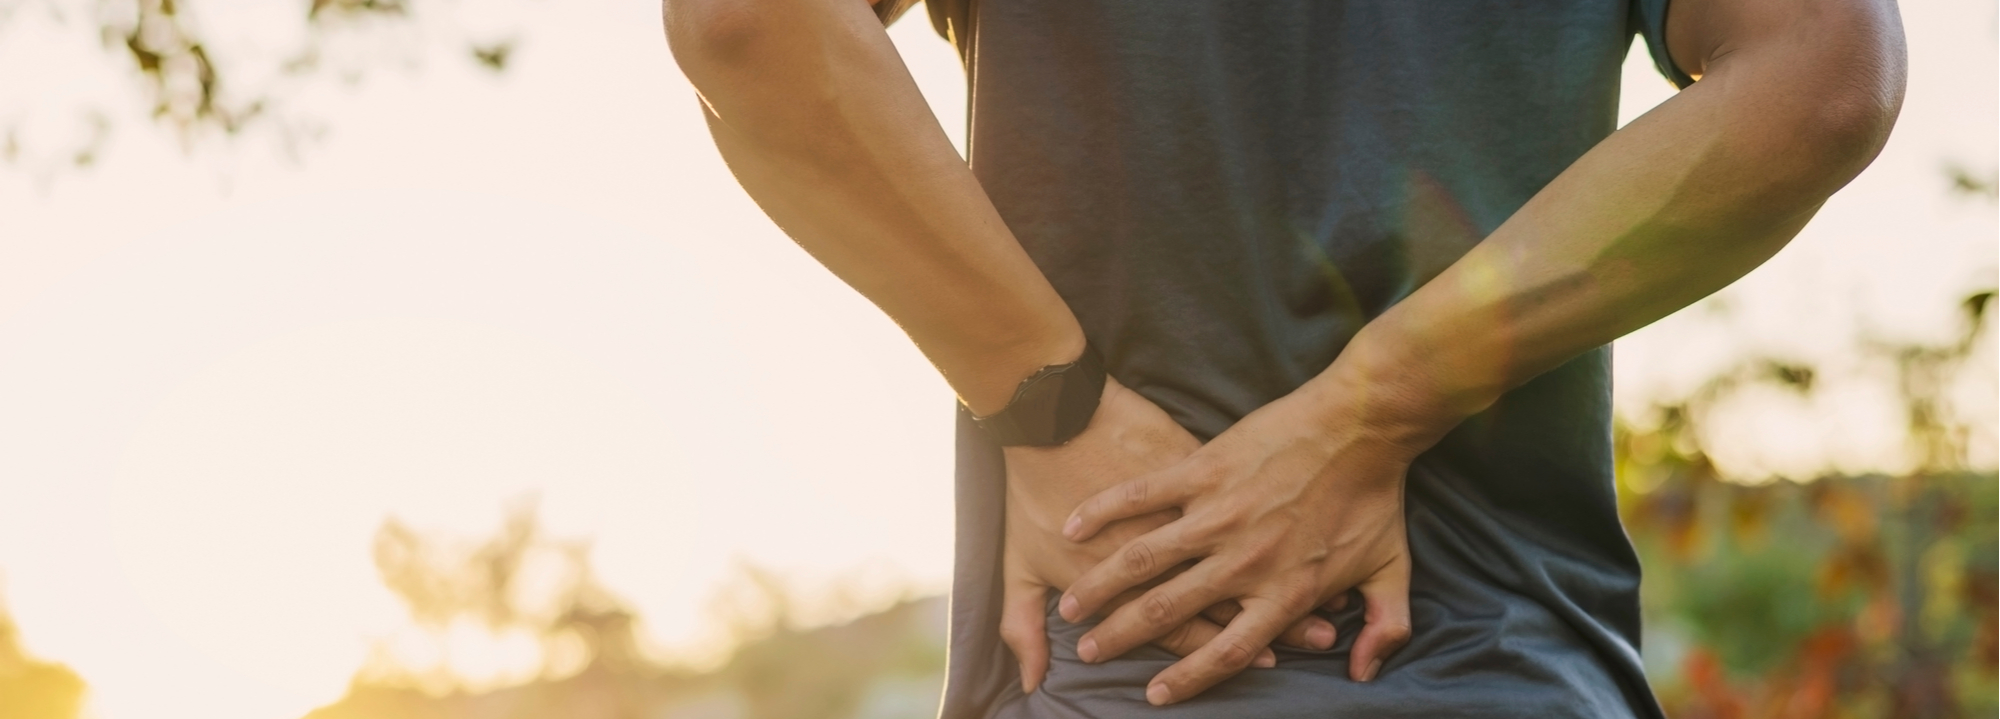 Upper Back Pain Causes and Treatment - Beacon Law